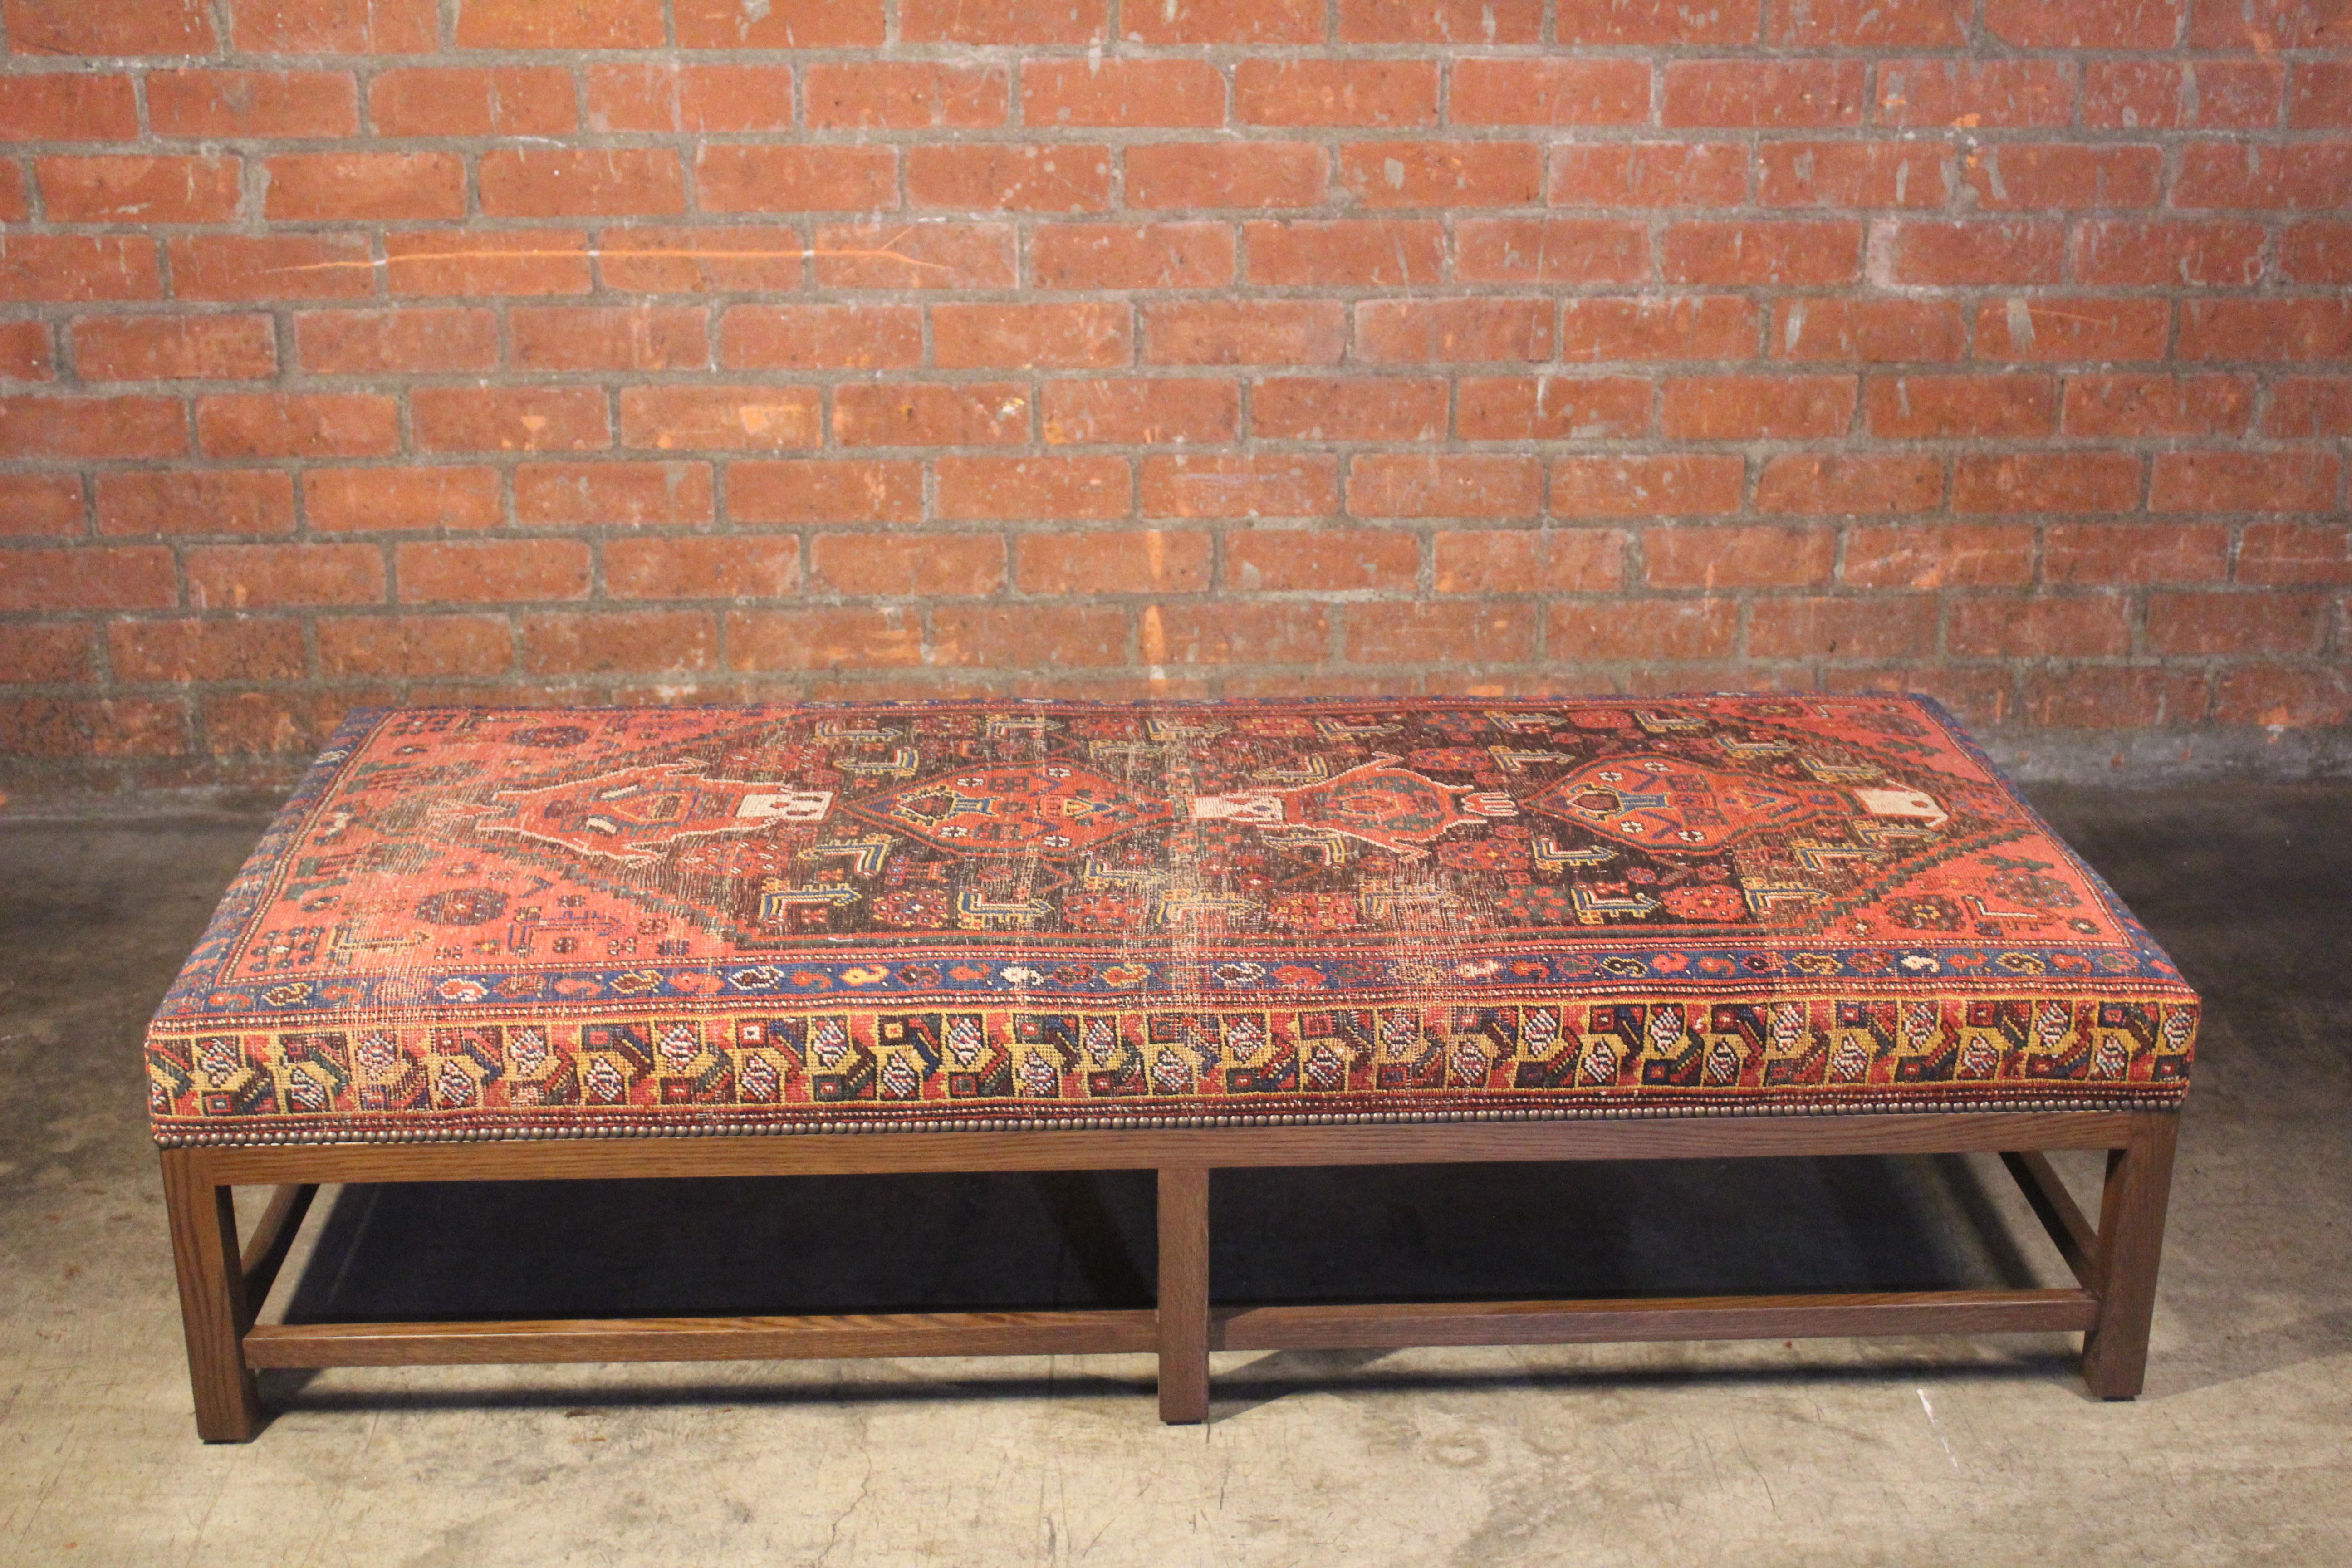 A custom-made Lexington ottoman upholstered in a vintage Turkish rug. Handmade in Los Angeles. The base is solid oak in a dark finish with antique brass nail heads. The rug has been professionally cleaned prior to upholstery.